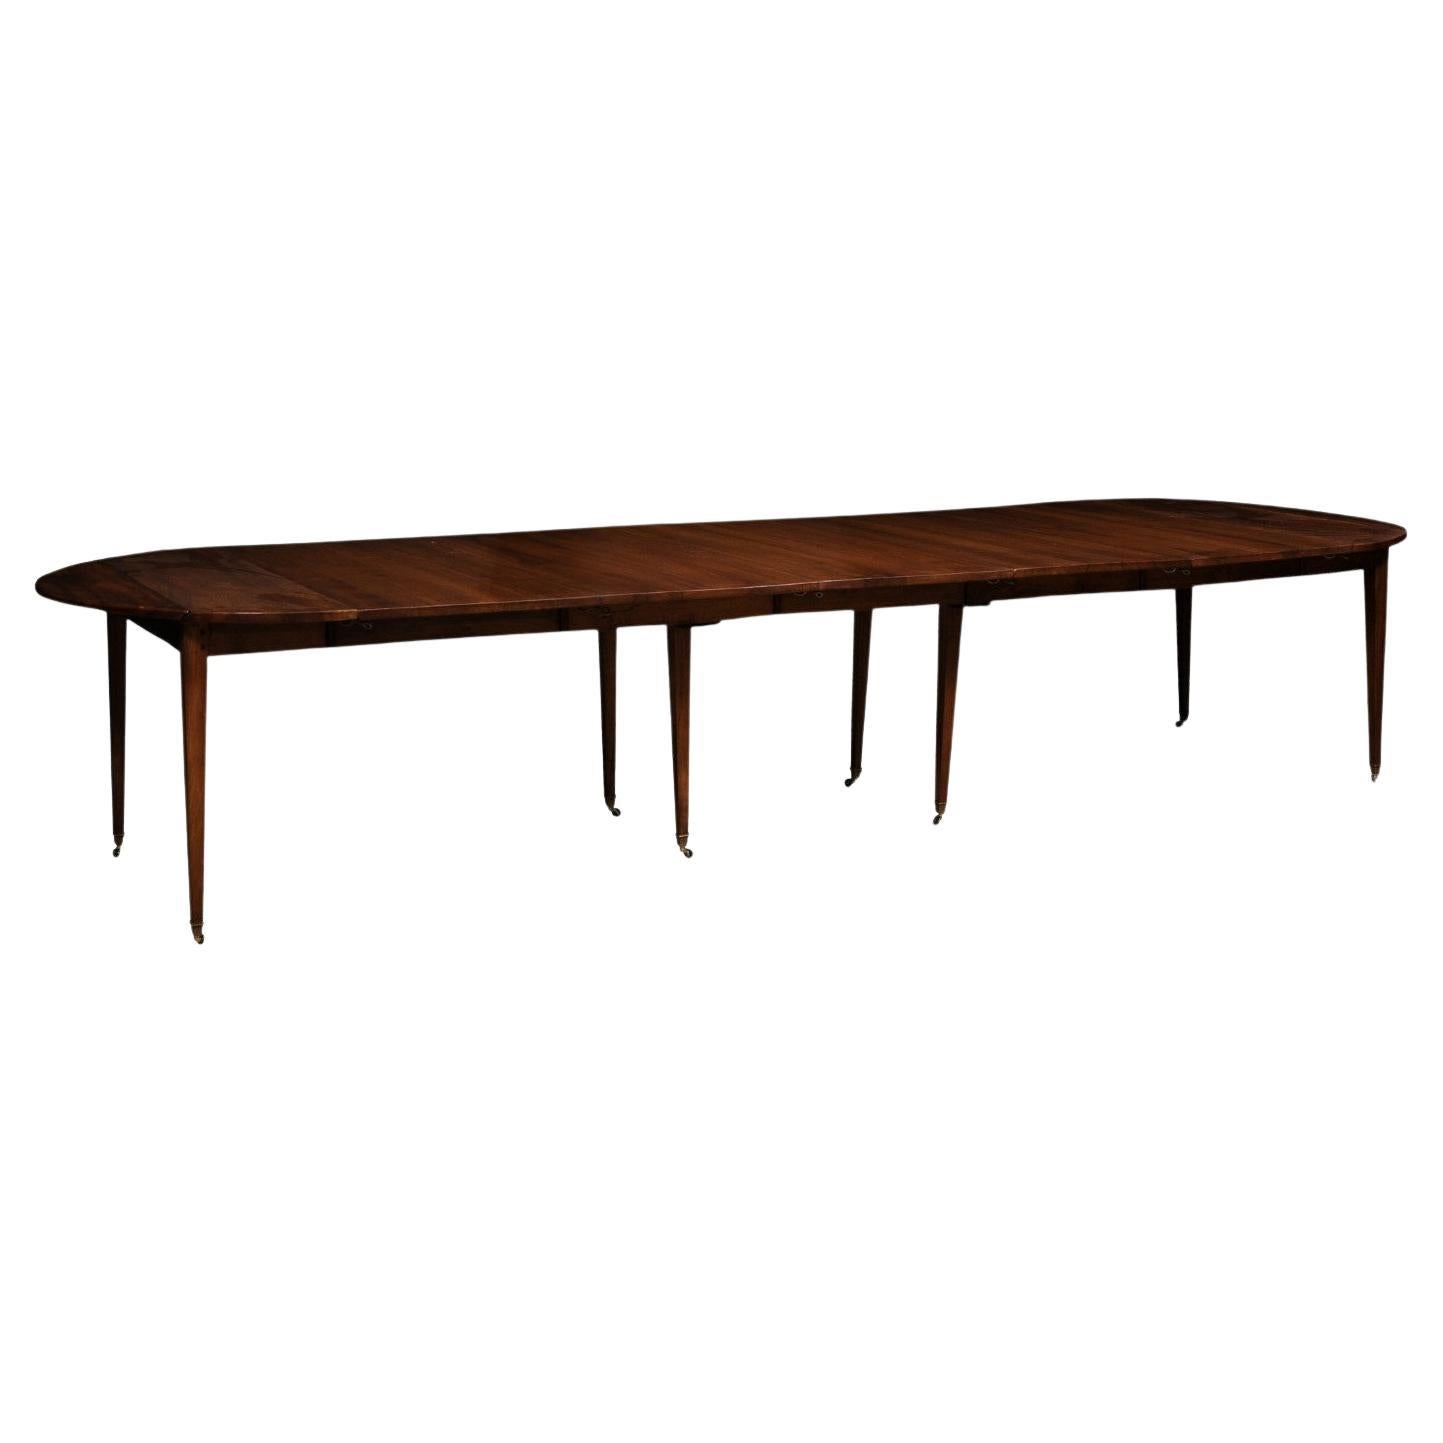 French Turn of the Century Extension Walnut Table With Five Leaves Circa 1900 For Sale